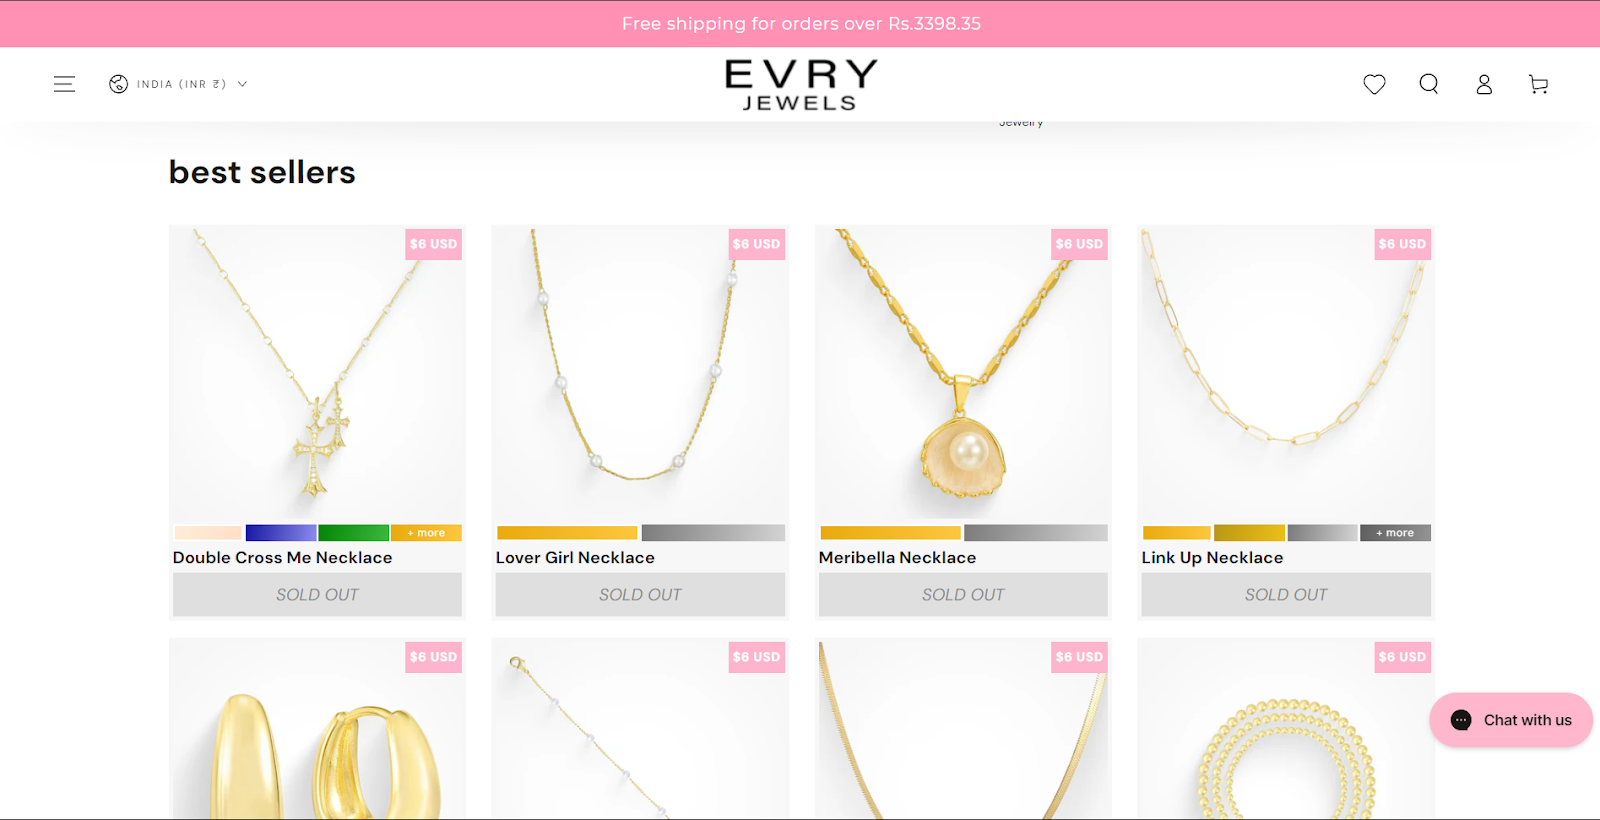 What Makes Evry Jewels Special?